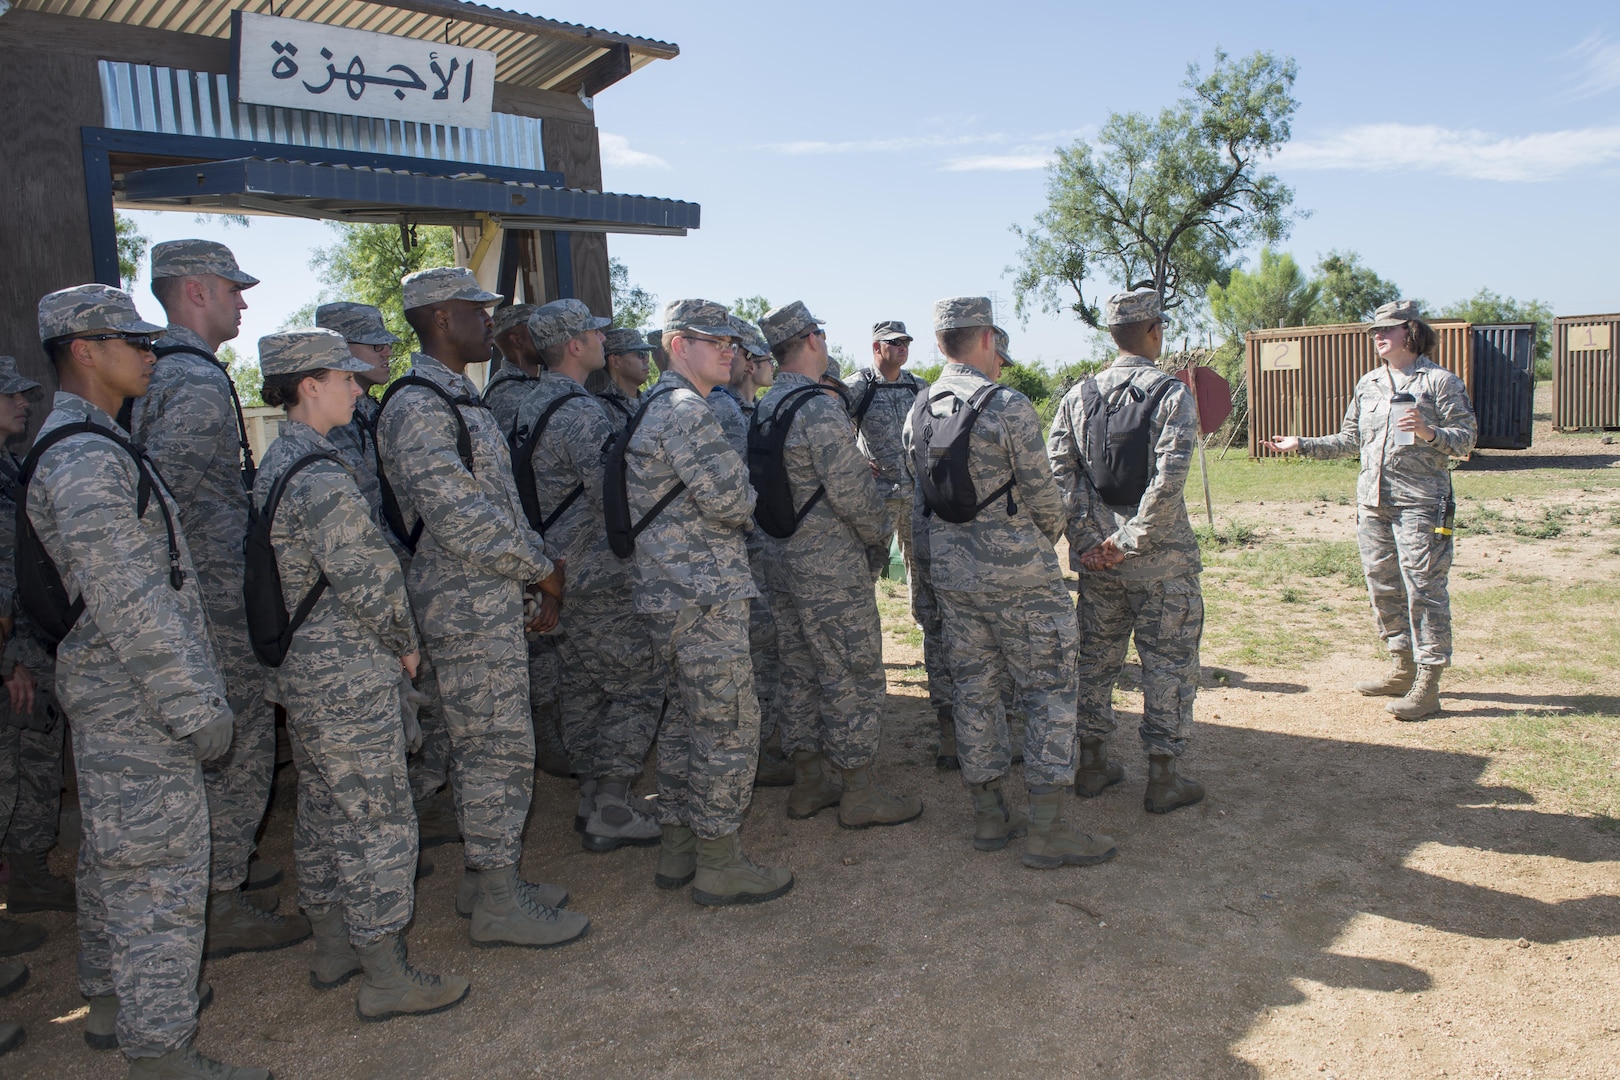 Master Sgt. Crystal Ybarra, 319th Training Squadron military training instructor, provides a tour to chaplain candidates of the Basic Expeditionary Airmen Skills Training at Joint Base San Antonio-Lackland, Texas, July 5, 2017. The tour was part of the Chaplain Candidate Intensive Internship. (U.S. Air Force photo by Senior Airman Krystal Wright)